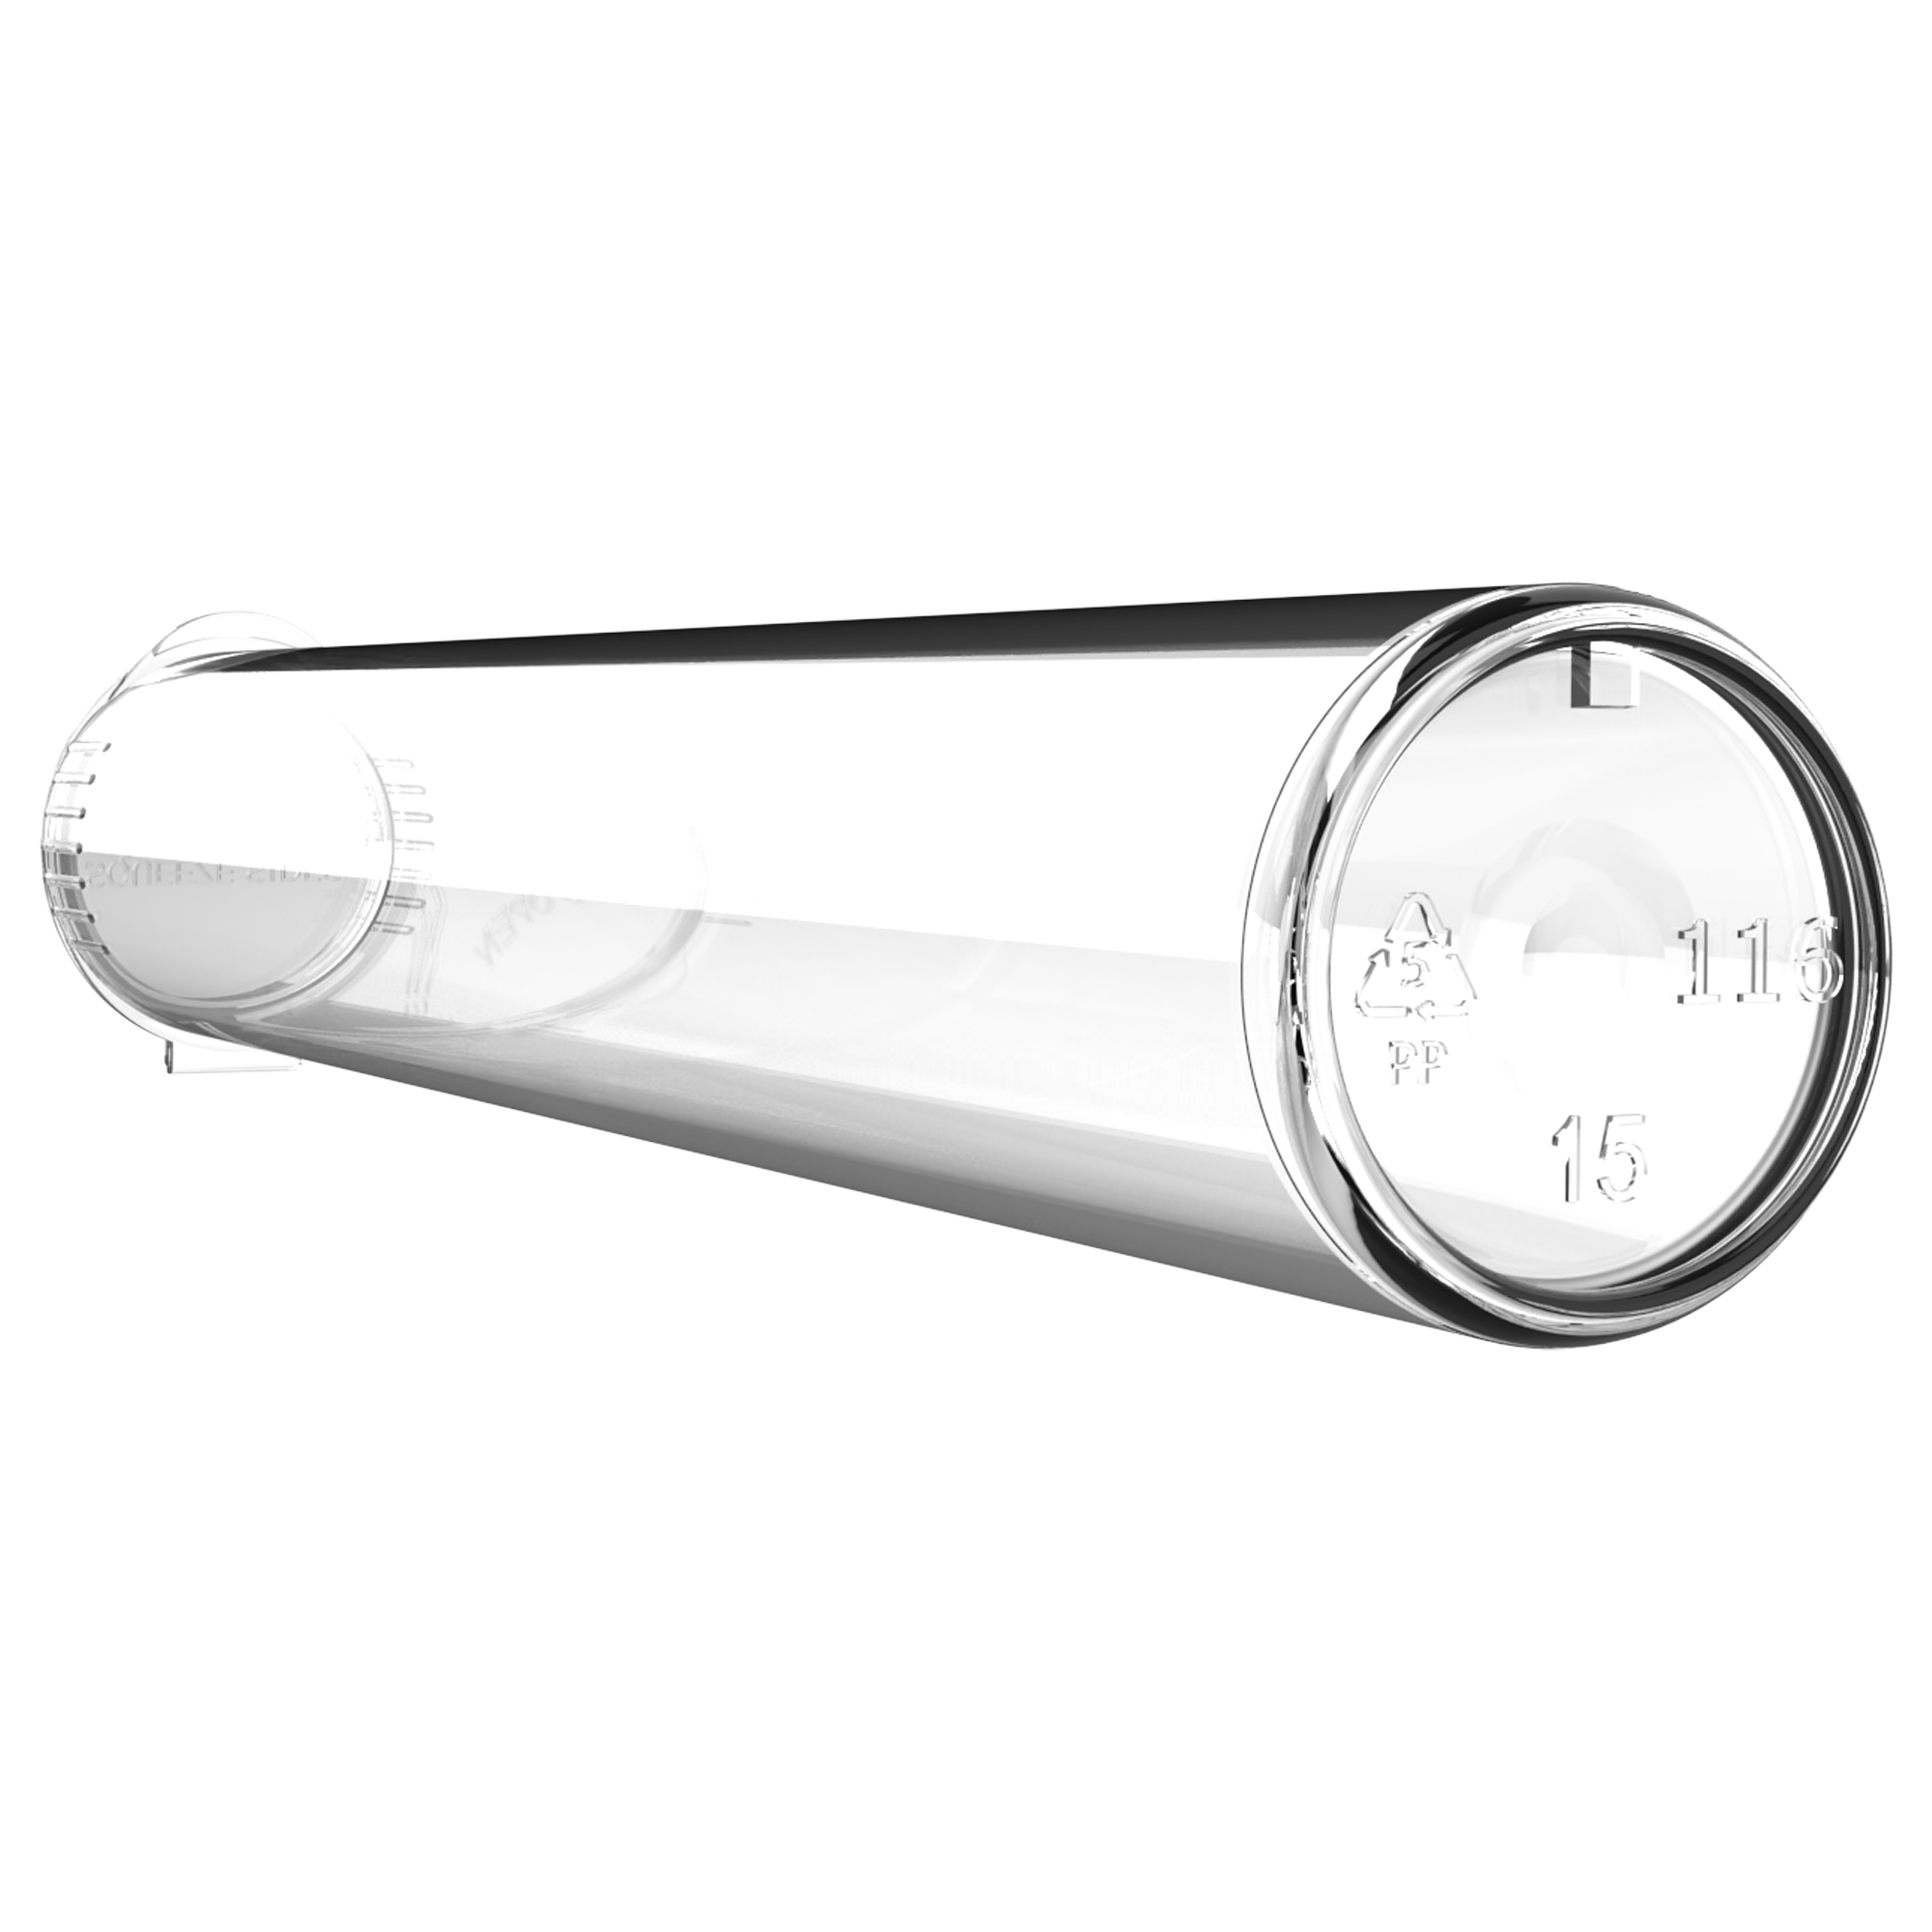 116mm Clear Pop Top Pre Roll Child Resistant Tubes - (500 qty.)